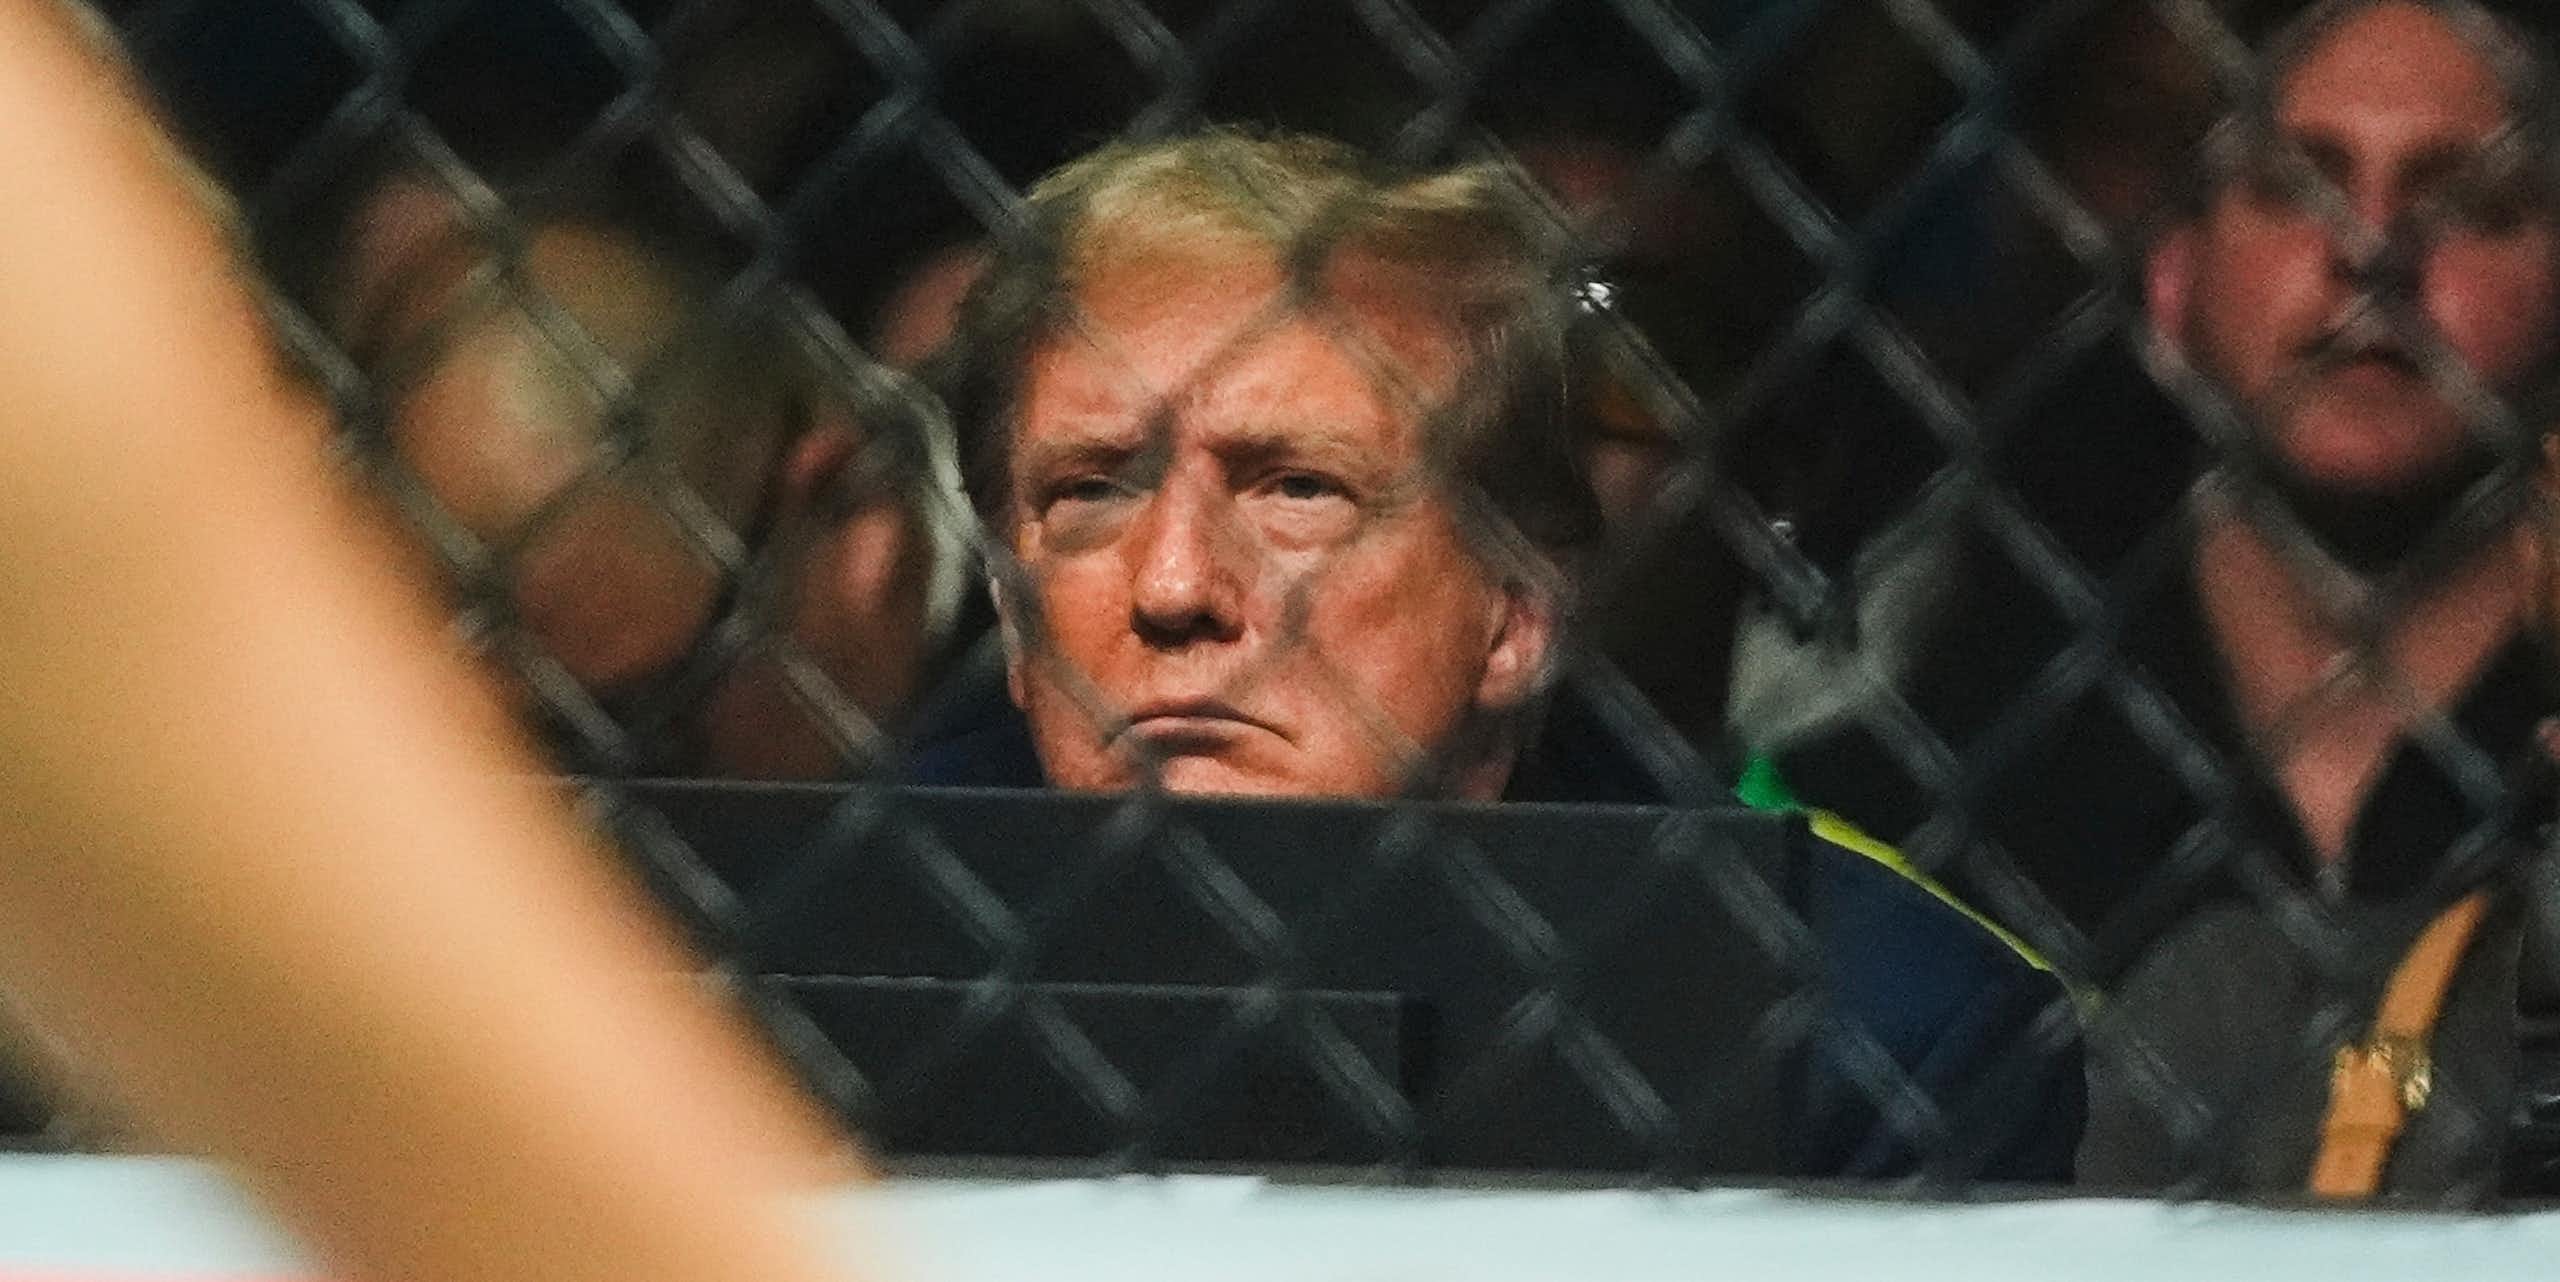 A man with blond hair frowns and is pictured through a chain link barrier.